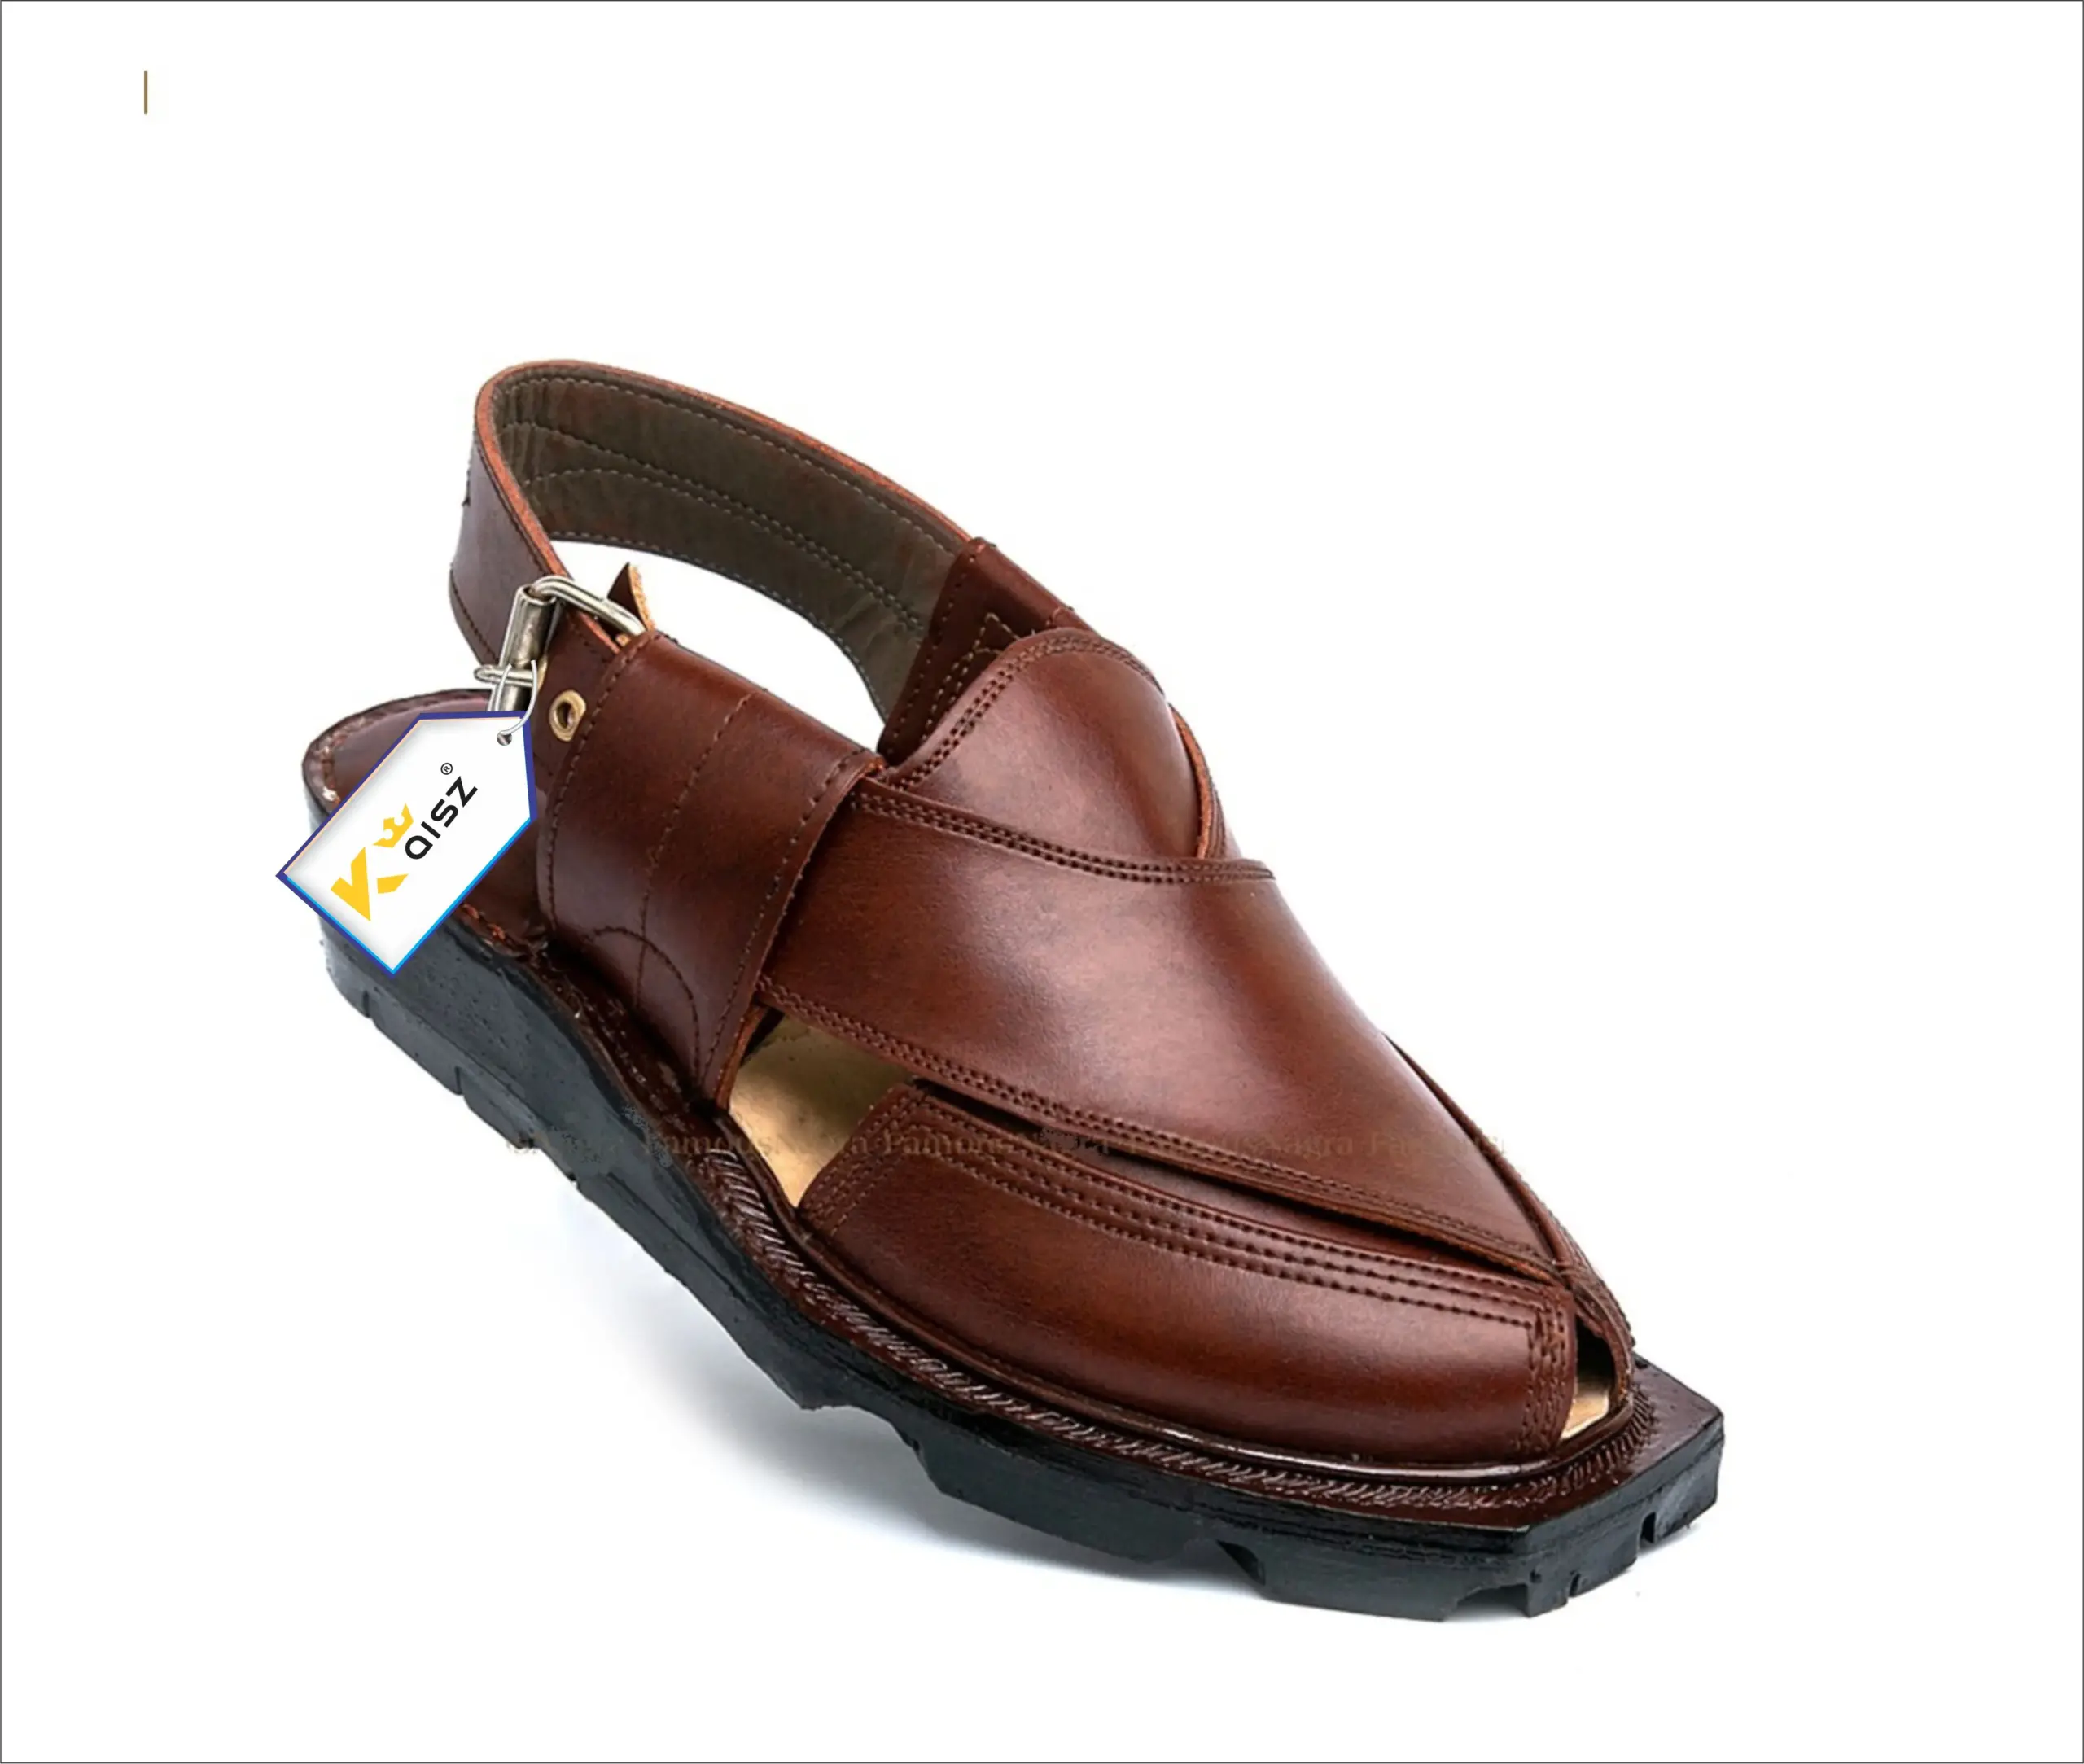 Original Dera Ghazi Khan Leather Chappal Price, Specification, and Cultural Heritage